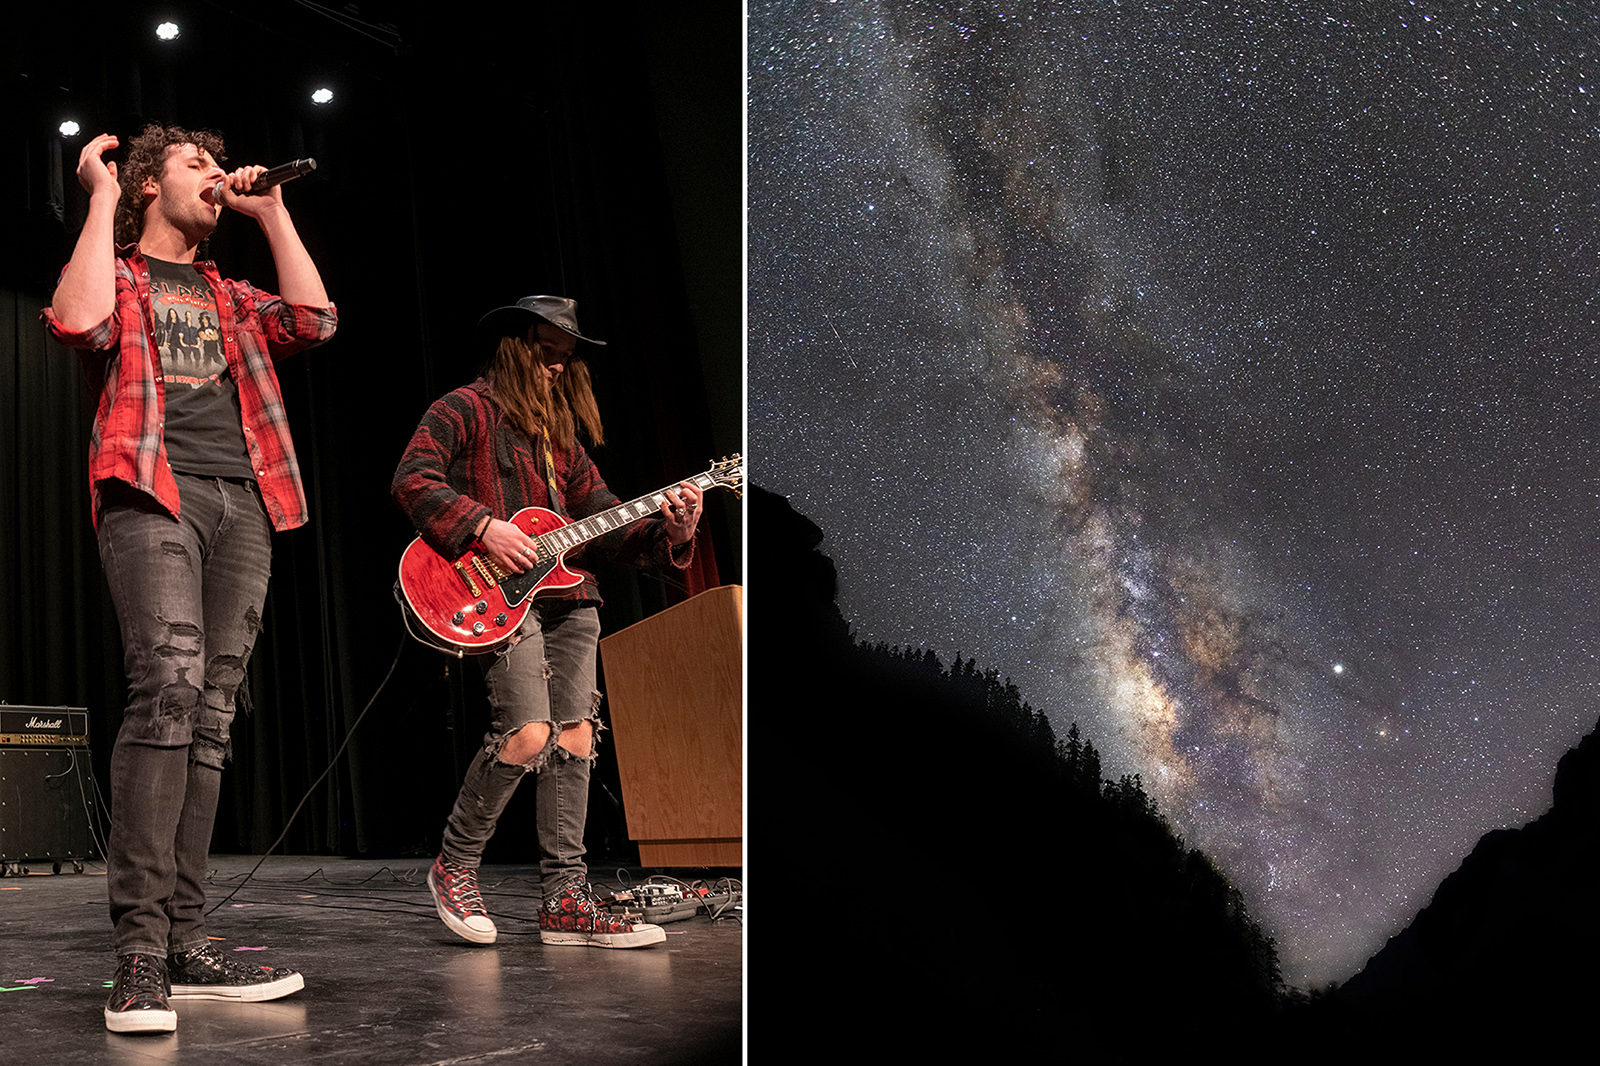 A diptych image where Quinn Freidenburg sings on stage on the left and a photo of space from the Himalayan Mountains on the right.